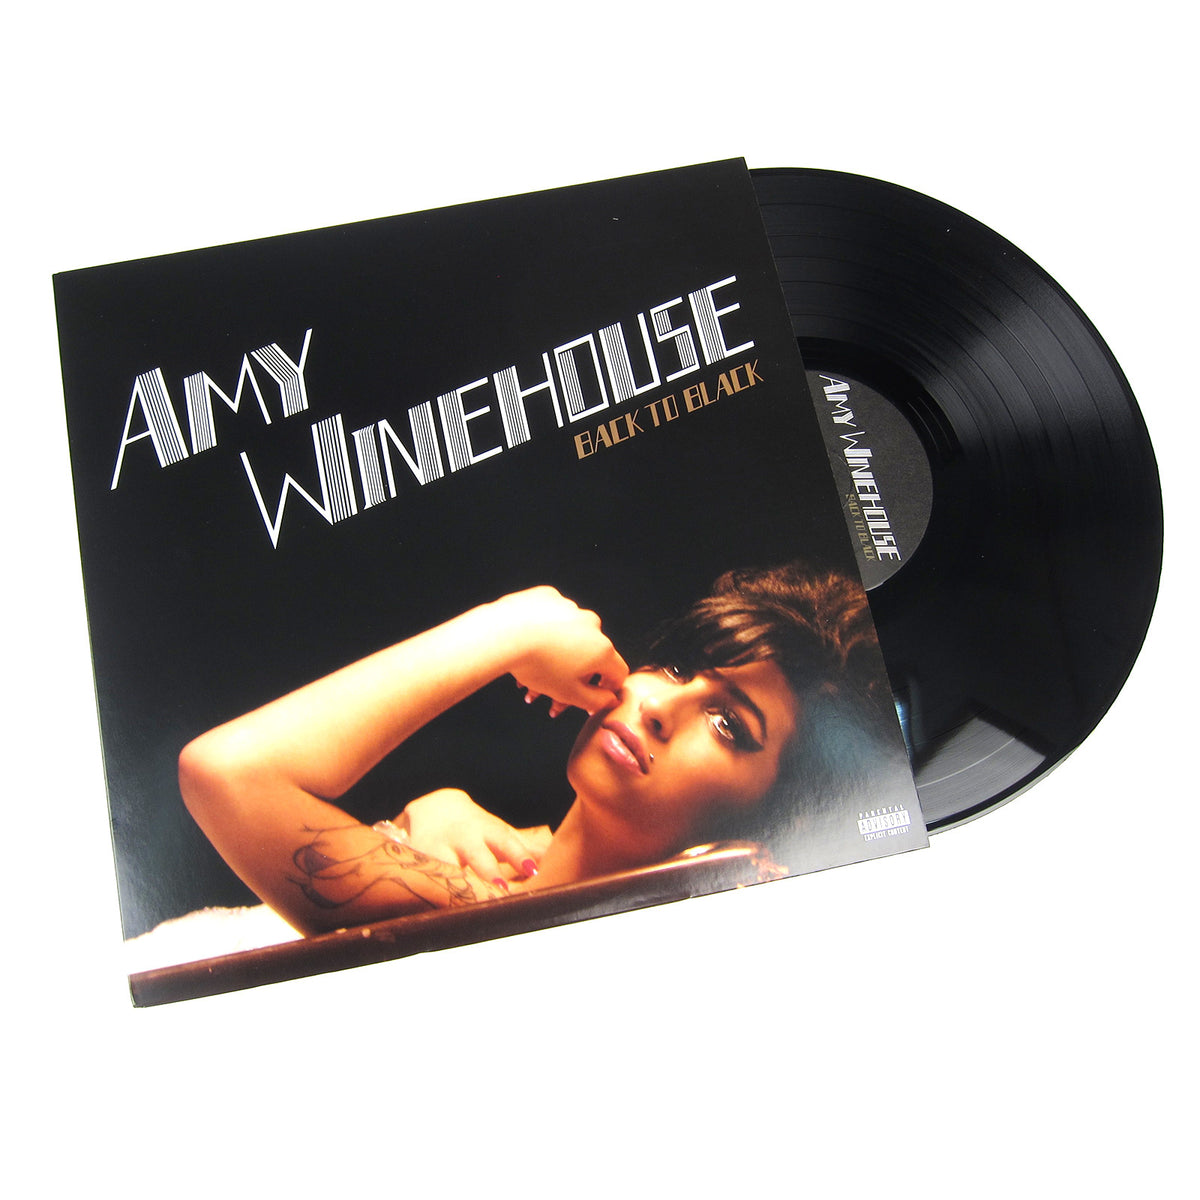 Record #806: Amy Winehouse - Back to Black (2006) - A Year of Vinyl